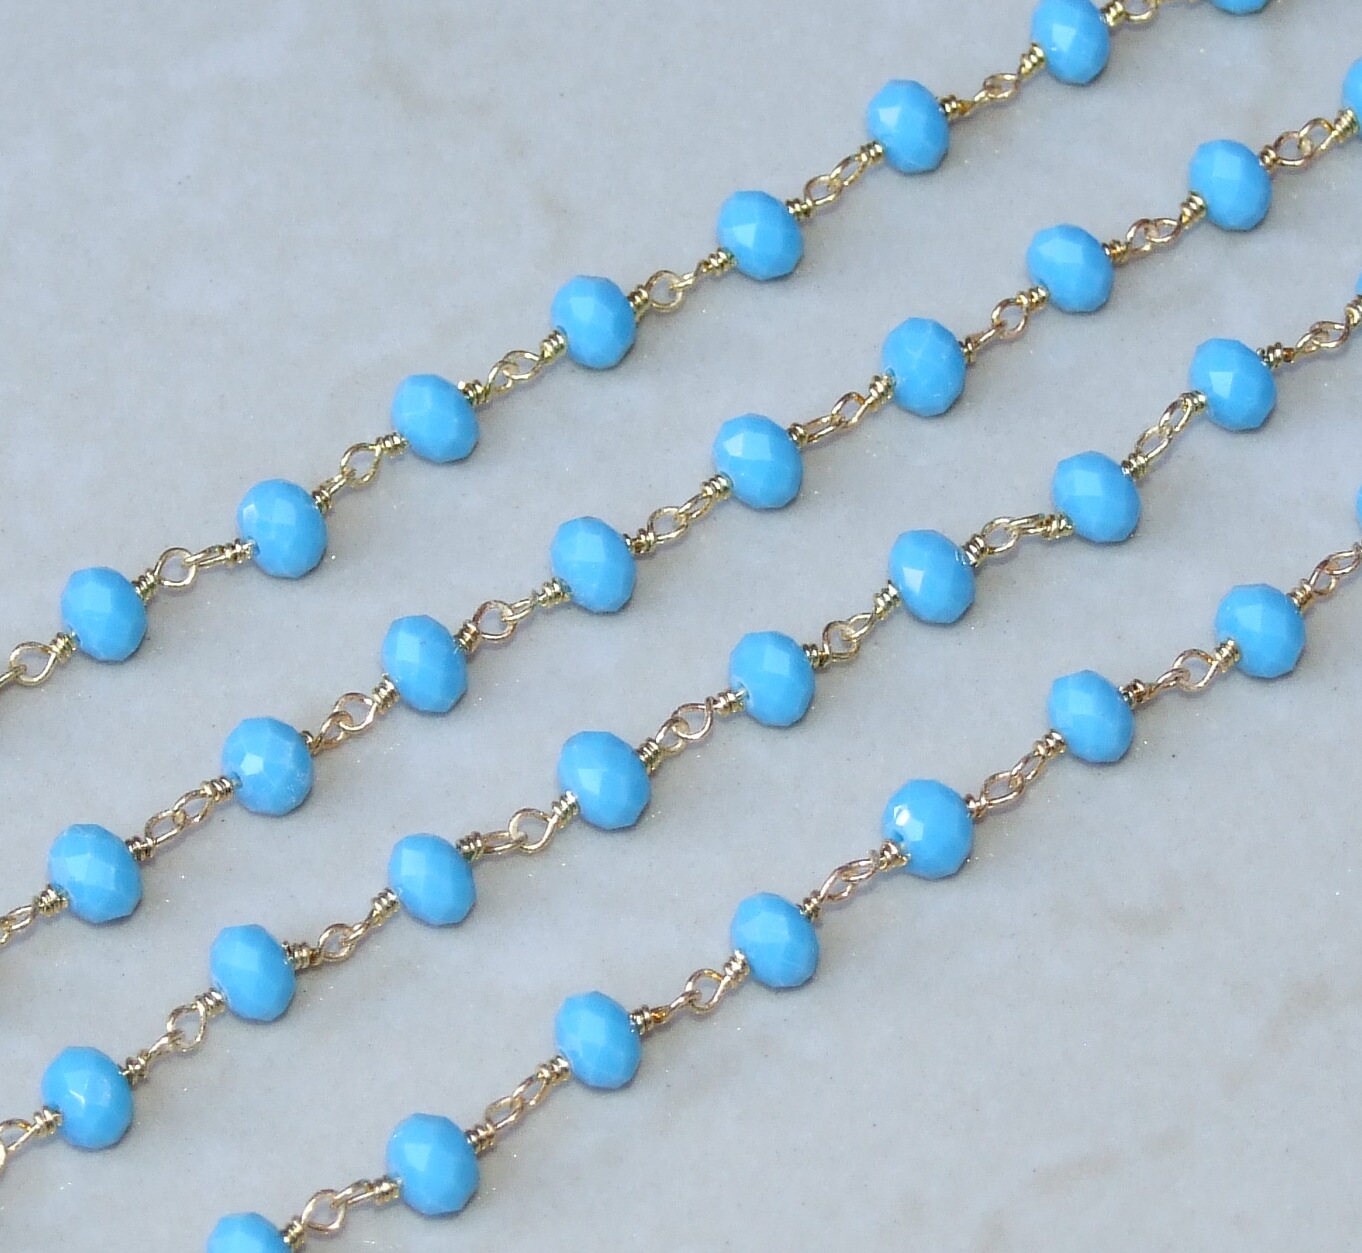 Turquoise Glass Rosary Chain, Bulk Chain, Rondelle Glass Beads, Beaded Chain, Body Chain Jewelry, Gold Chain, Necklace Chain, Belly Chain